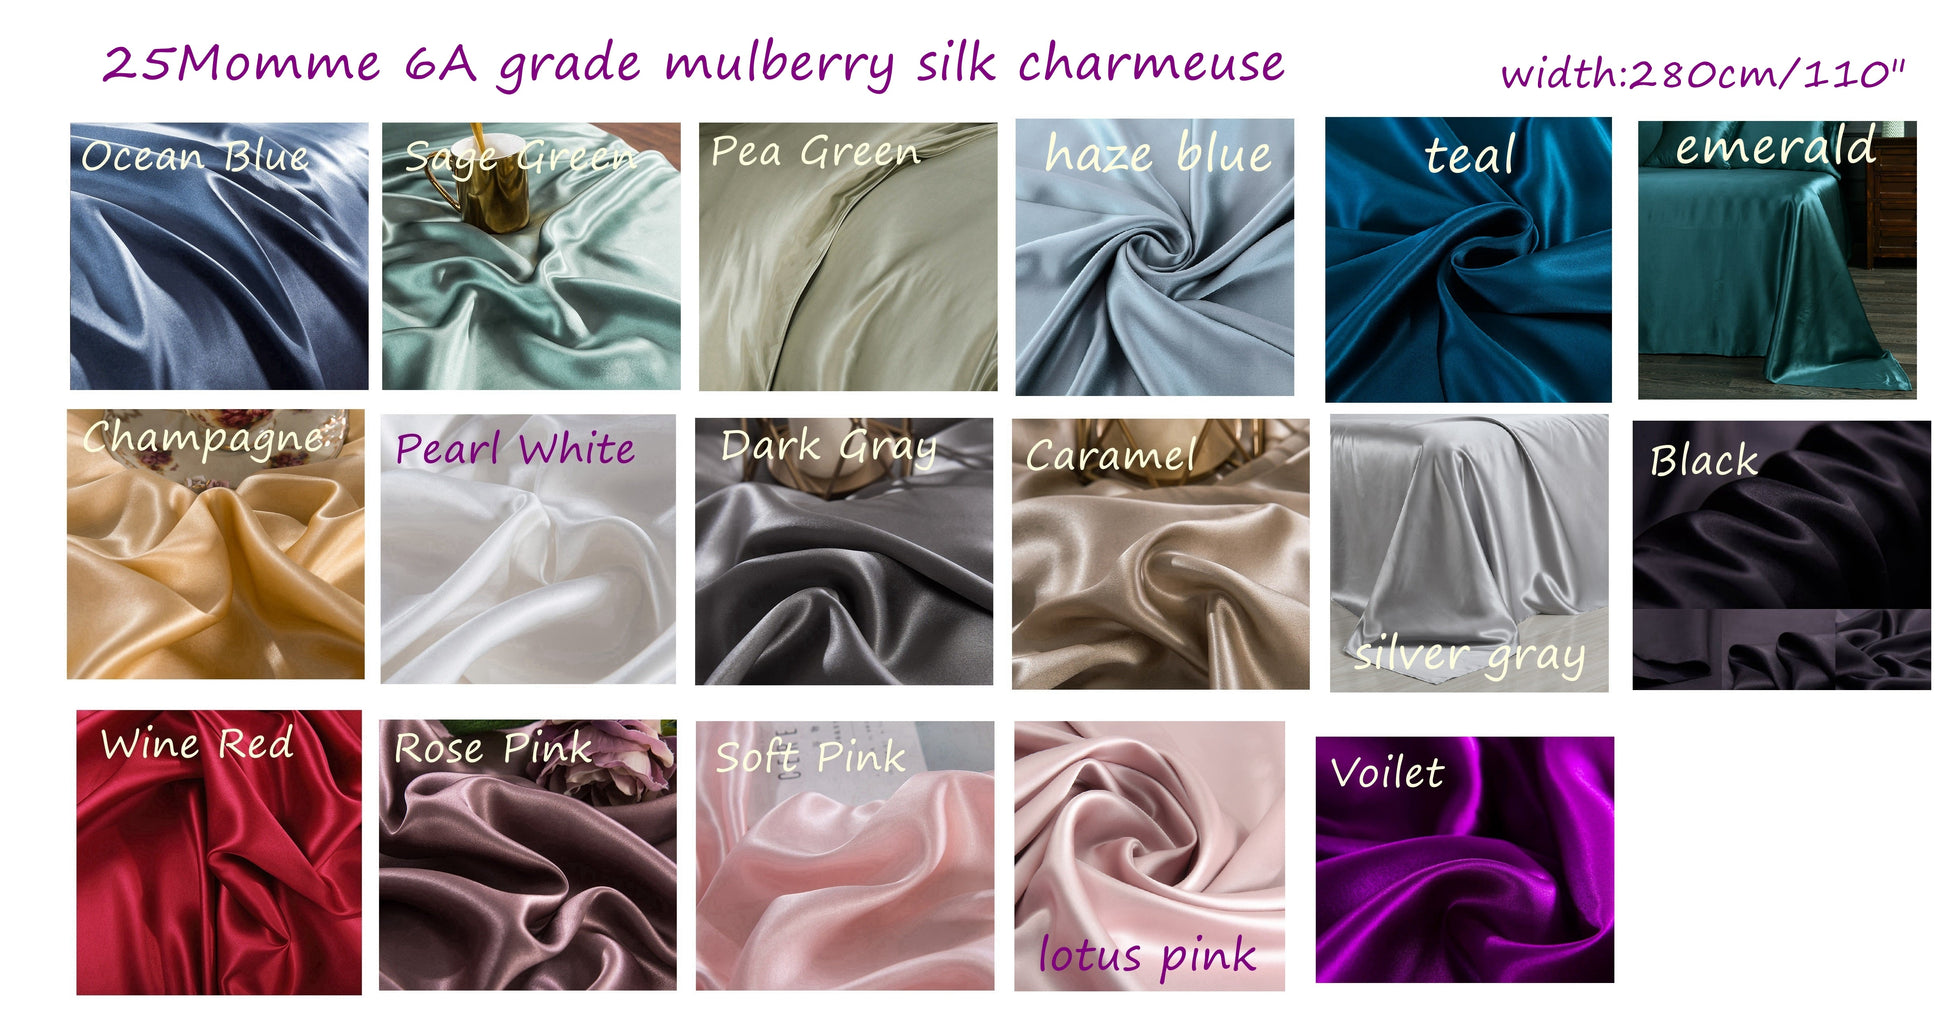 25Momme Seamless Luxury Silk Fitted Sheet/Flat Sheet/Dovut Cover/Bedding Set, Magic purple - Awulook